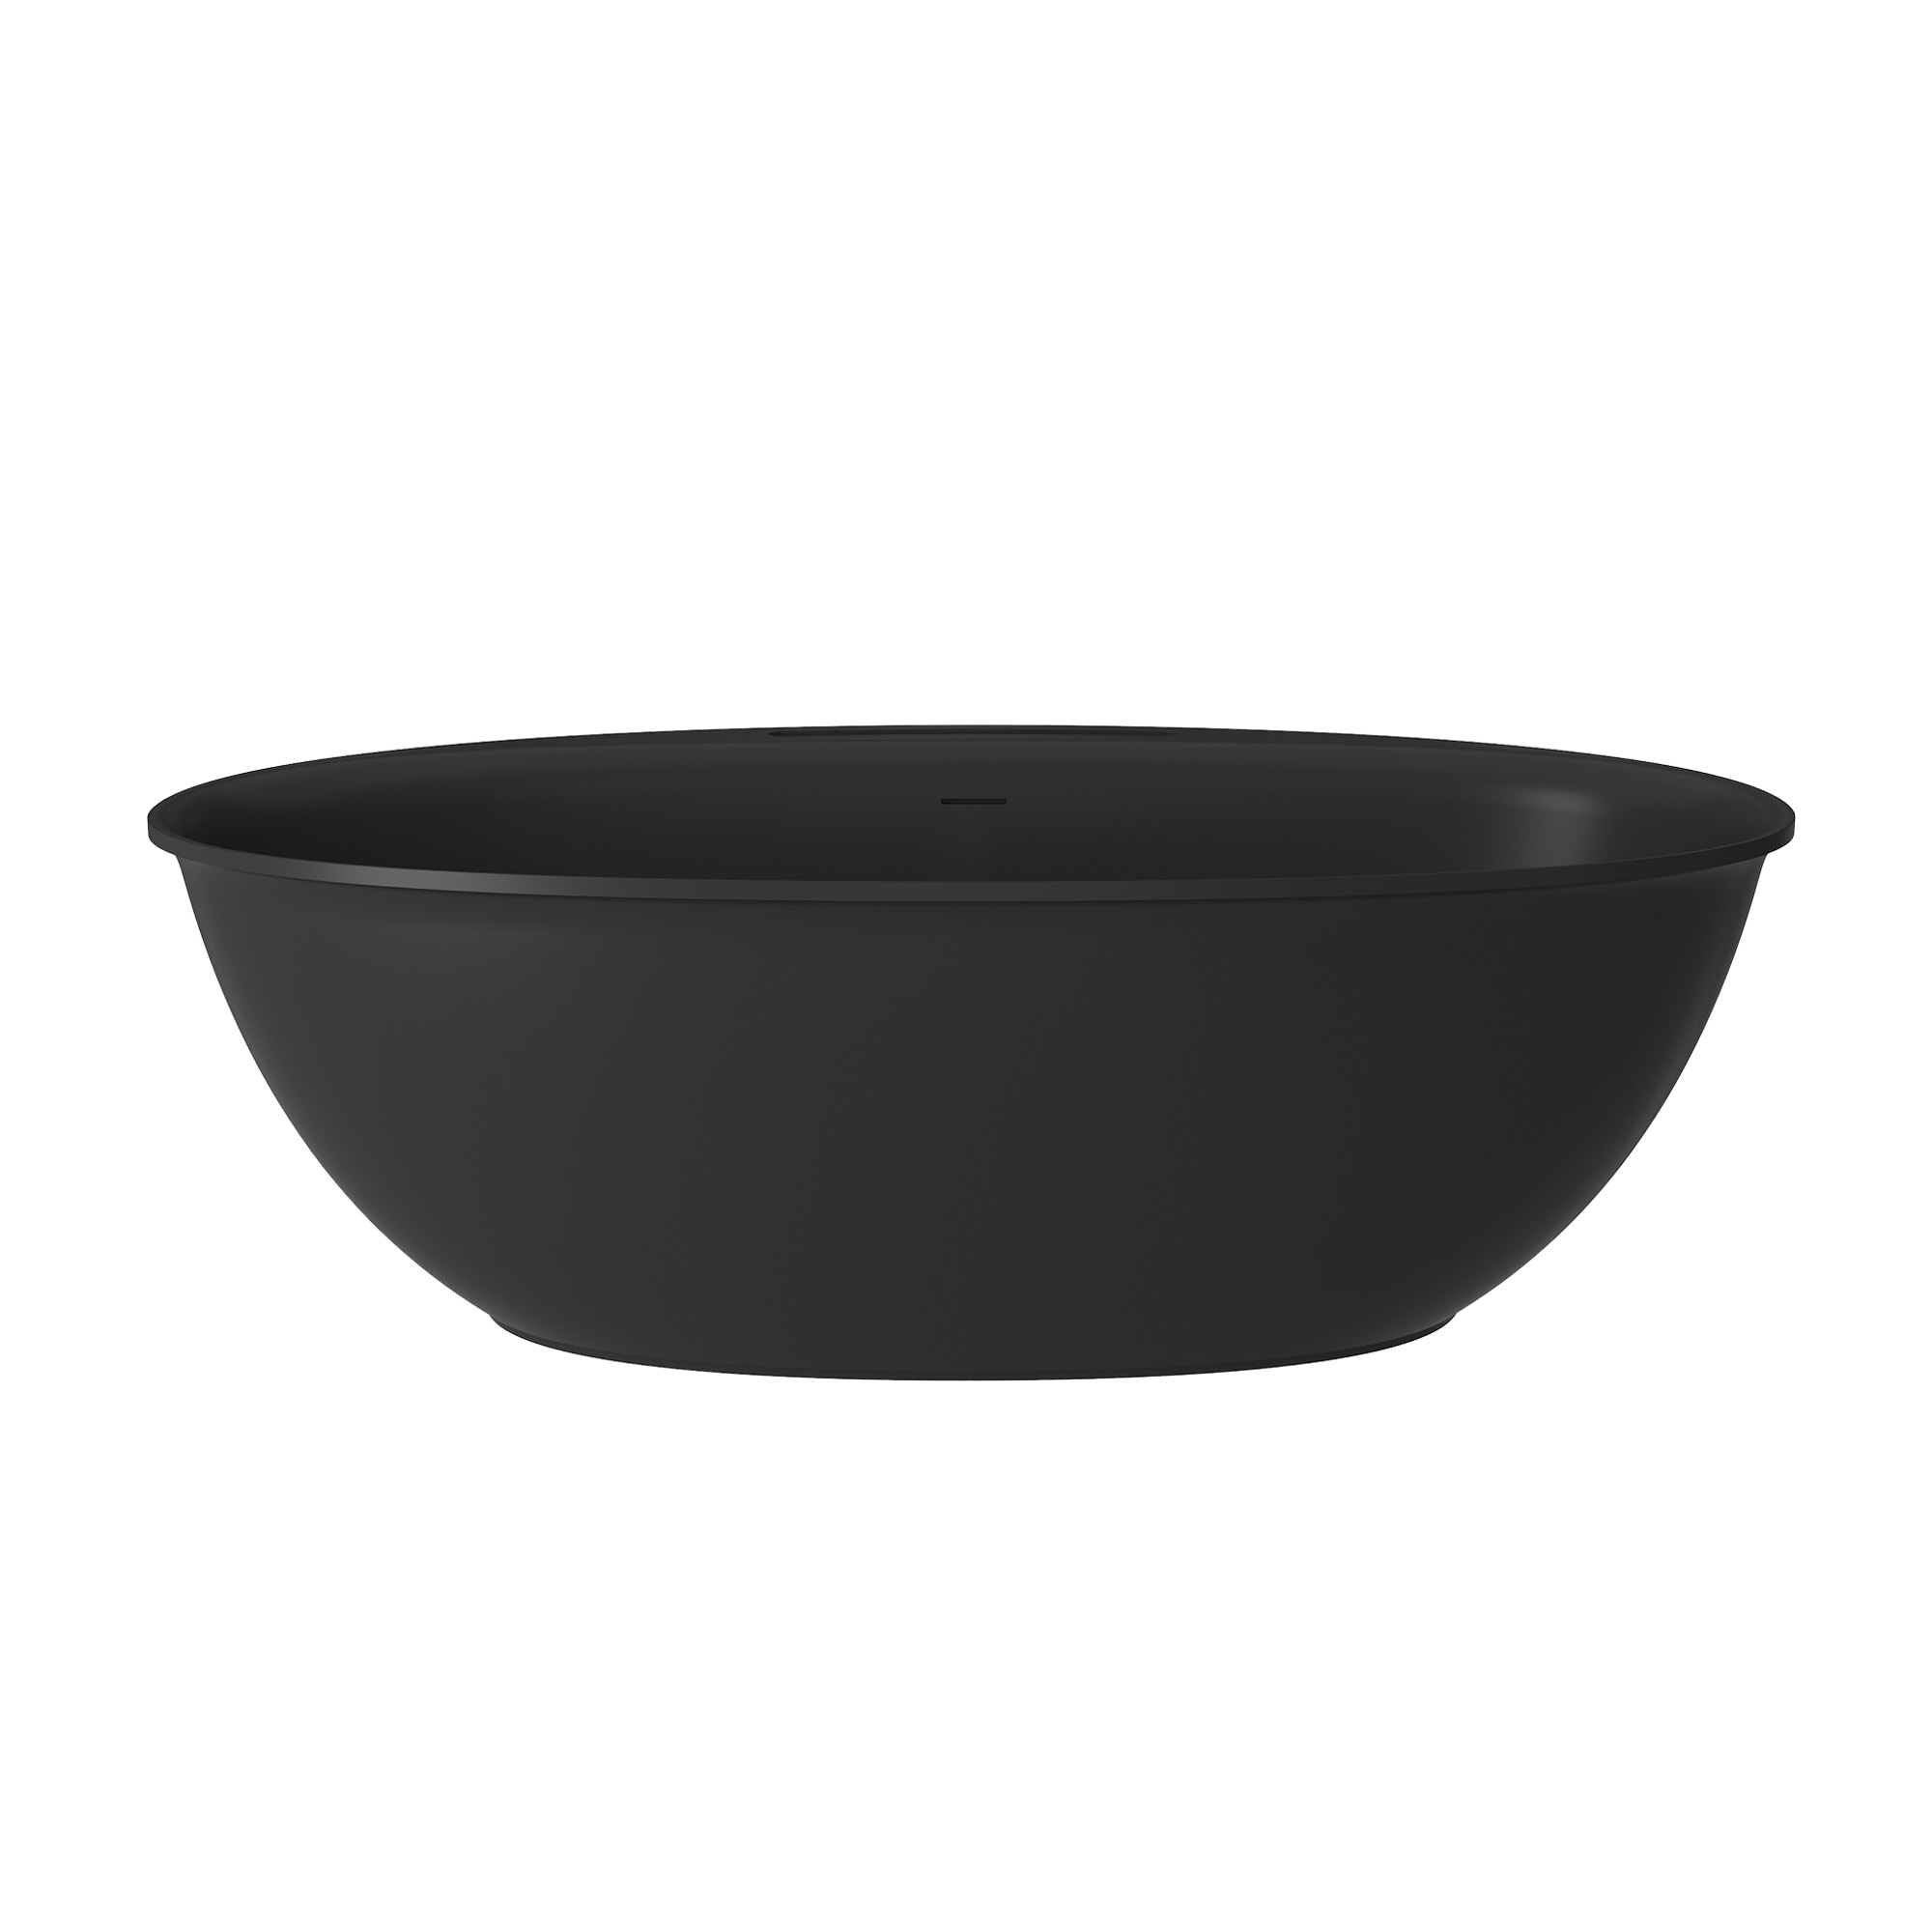 63/67" Stone Resin Freestanding Bathtubs in Matte Black, Oval Shaped Resin Bathtubs with Overflow and Drain, the Perfect Lengths and Sizes for Free Standing Bathtubs, Spa Like Atmosphere